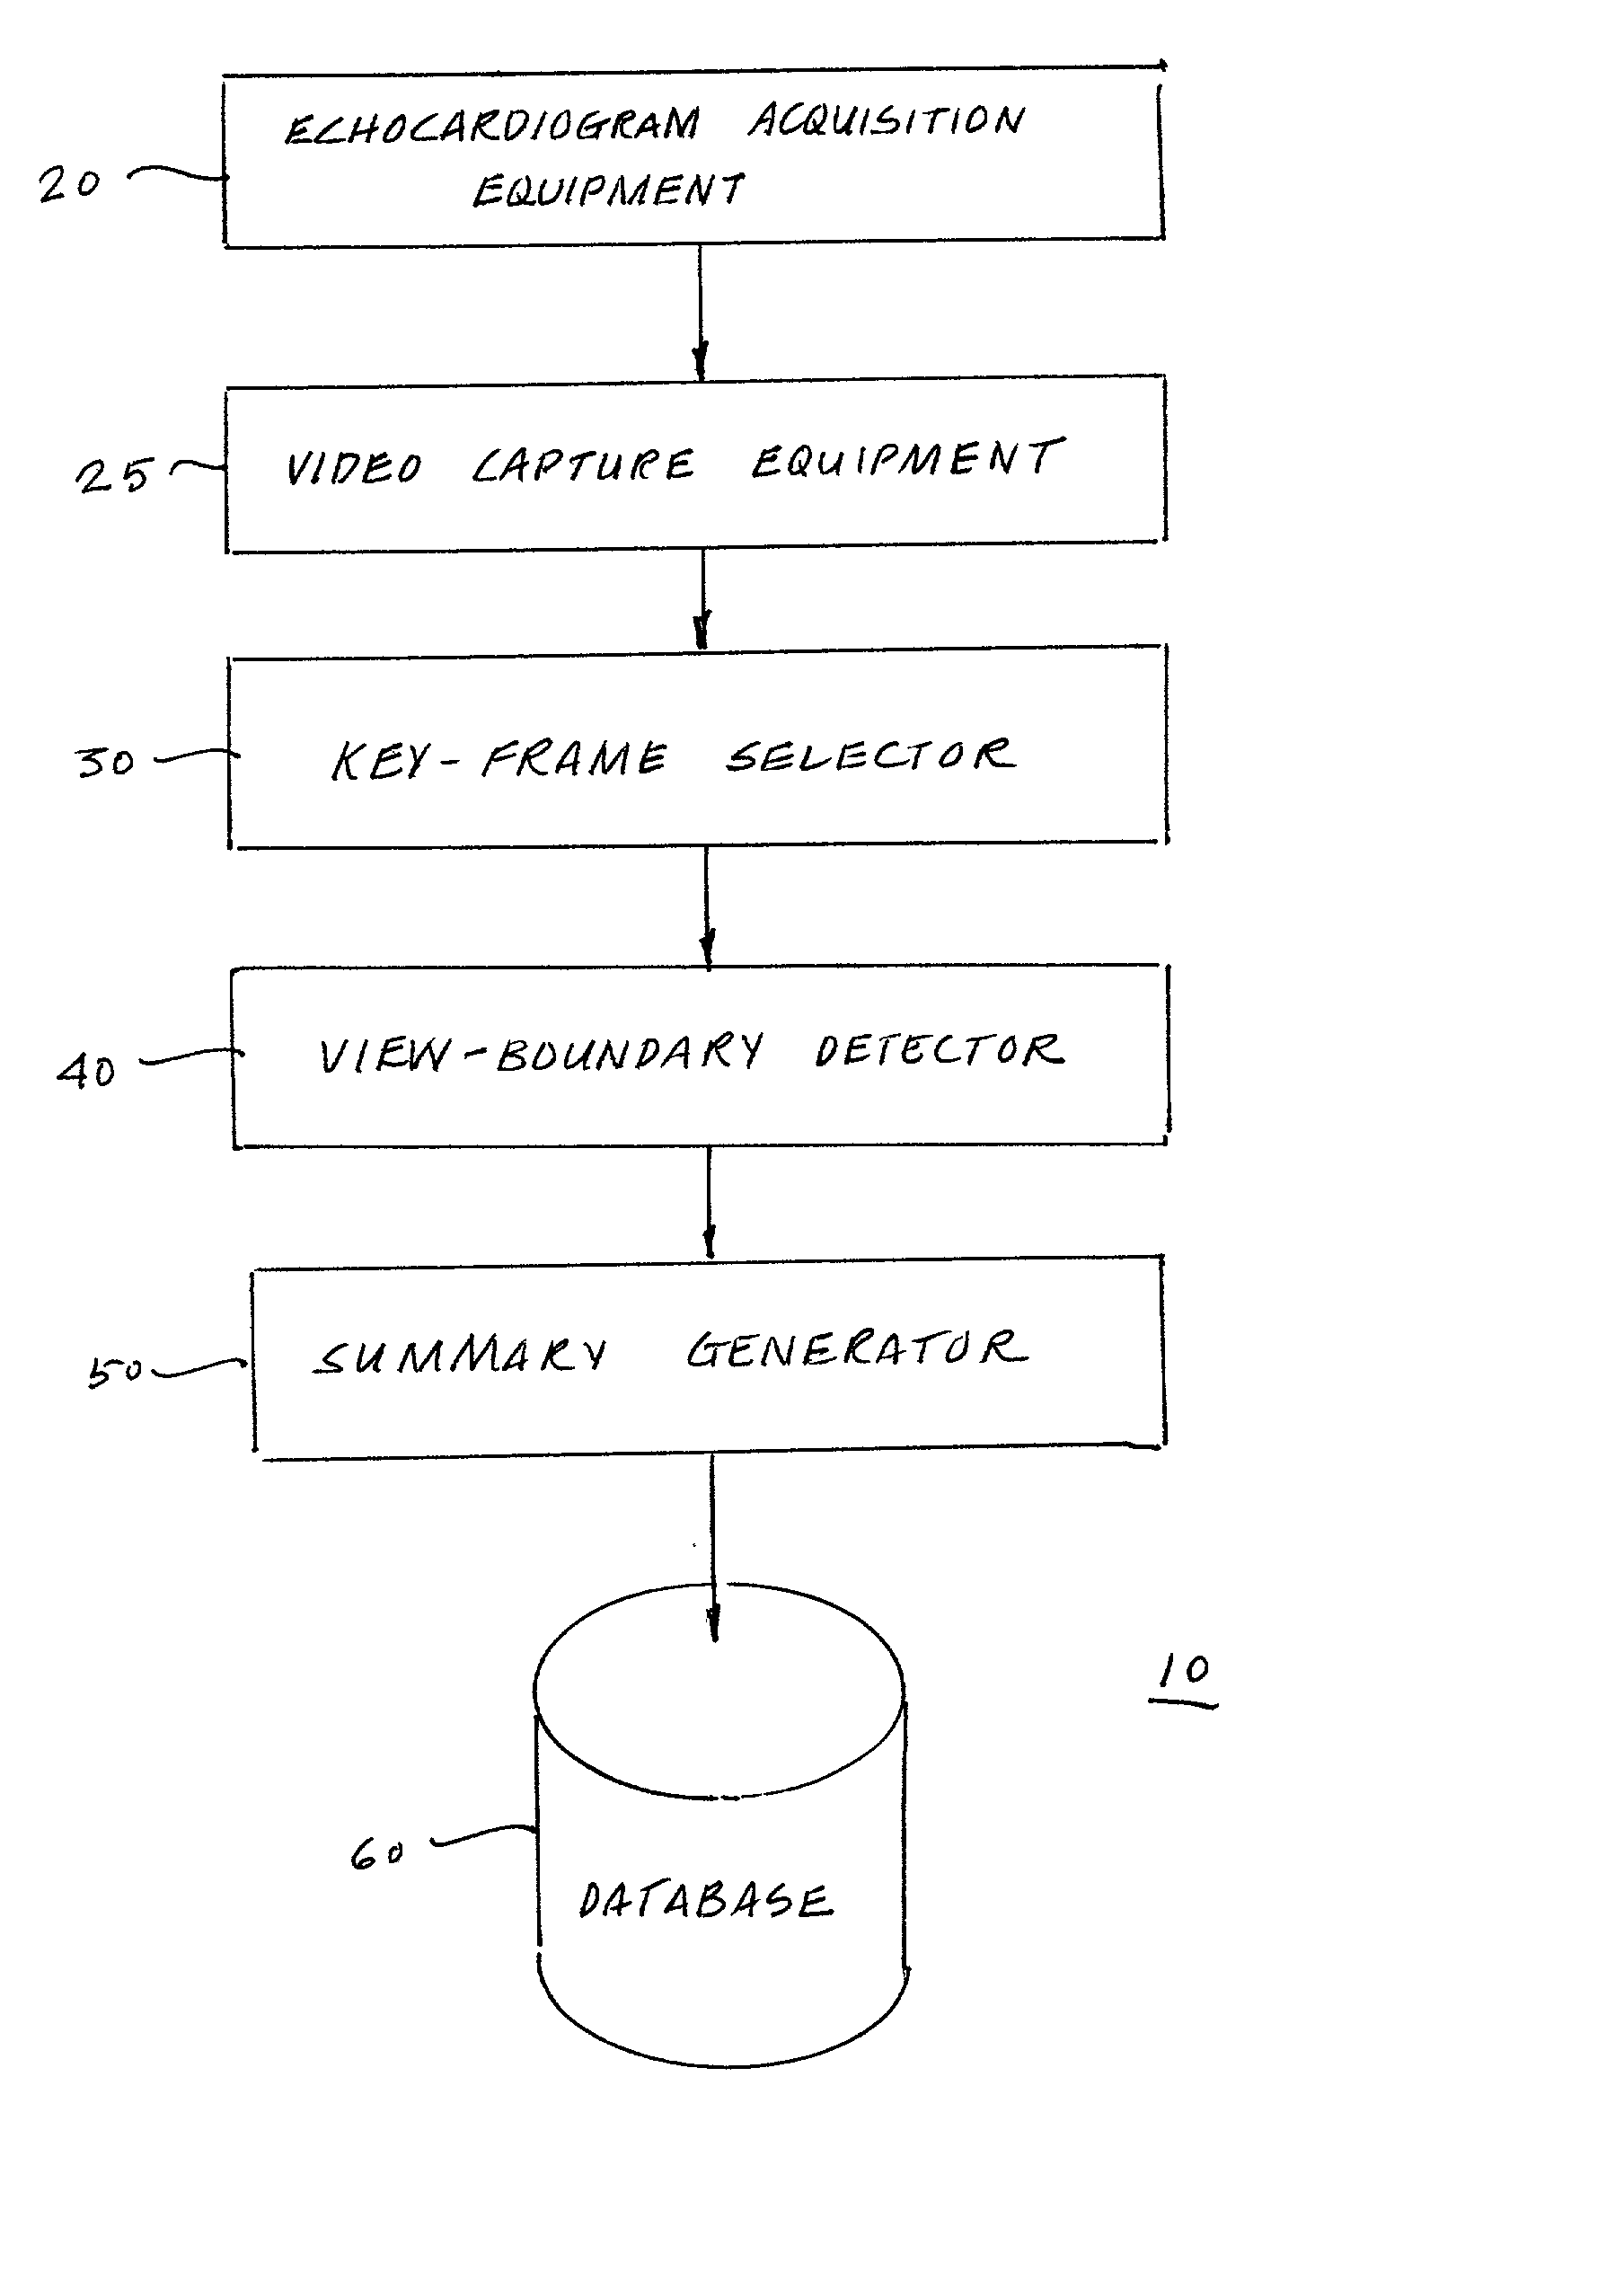 Method and apparatus for processing echocardiogram video images